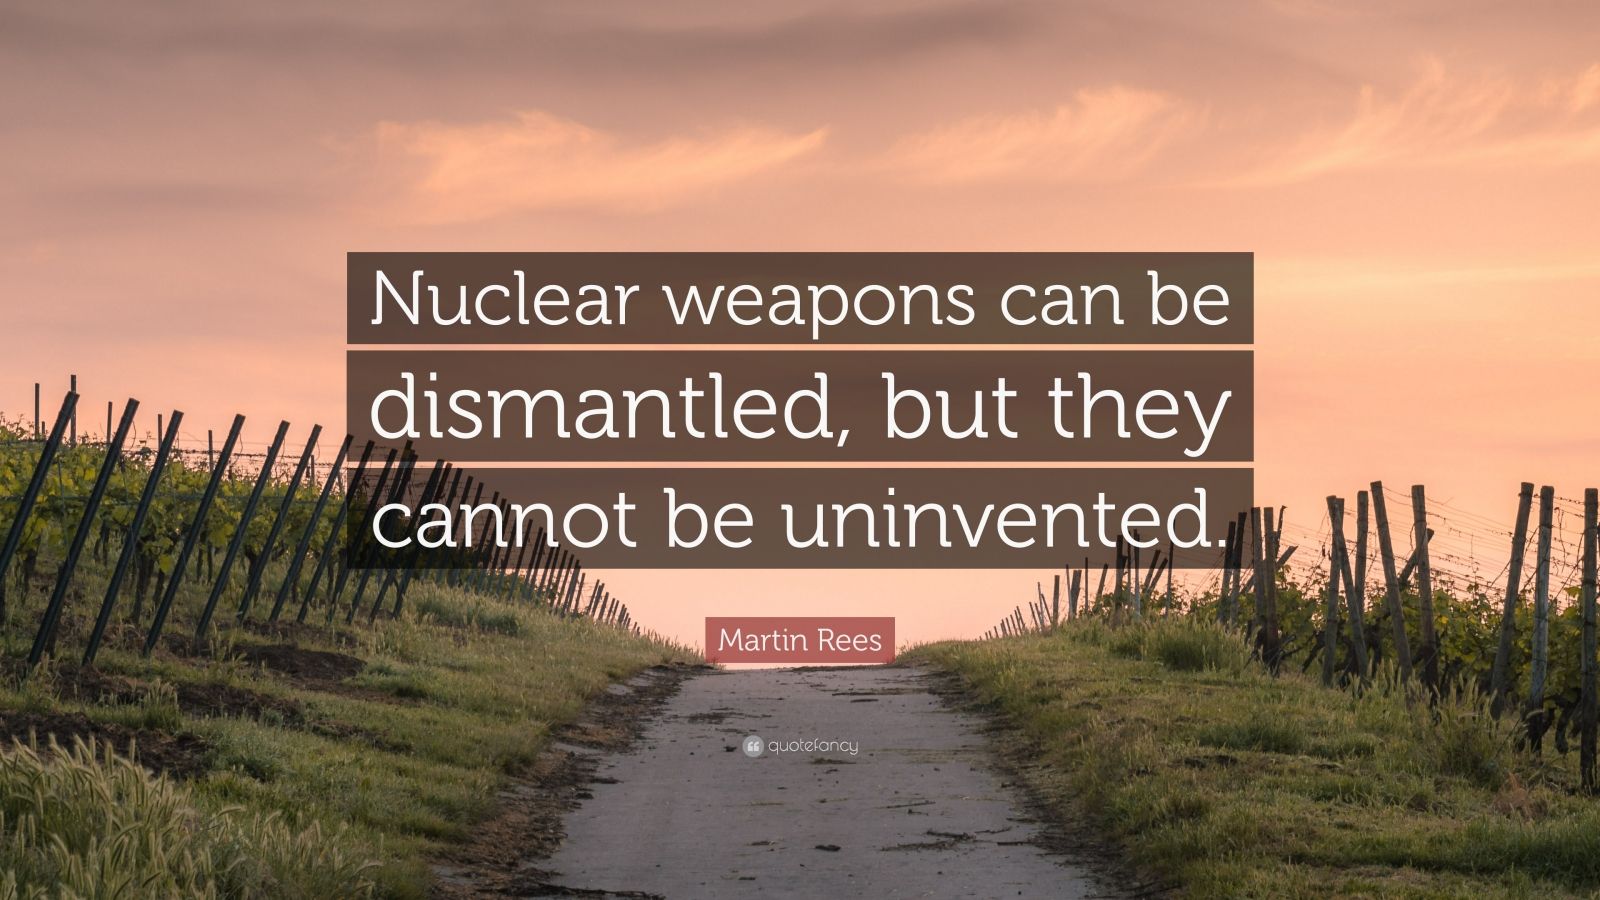 Martin Rees Quote “nuclear Weapons Can Be Dismantled But They Cannot Be Uninvented”